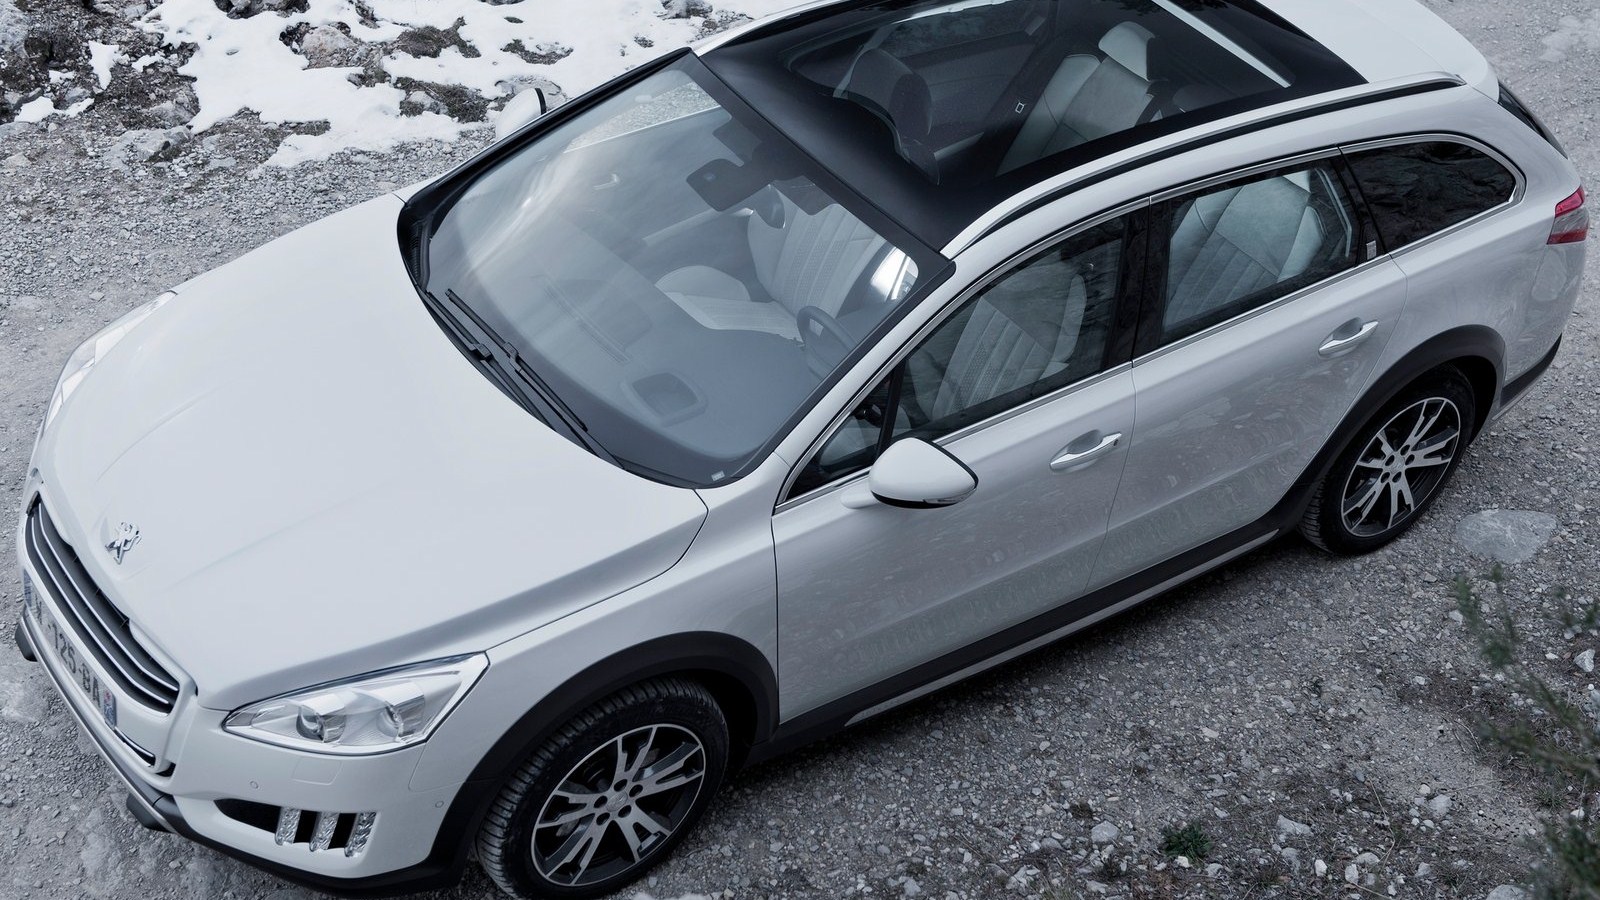 ... Cars: Peugeot 508 RXH-hybrid Interior and Exterior Photos & Wallpapers